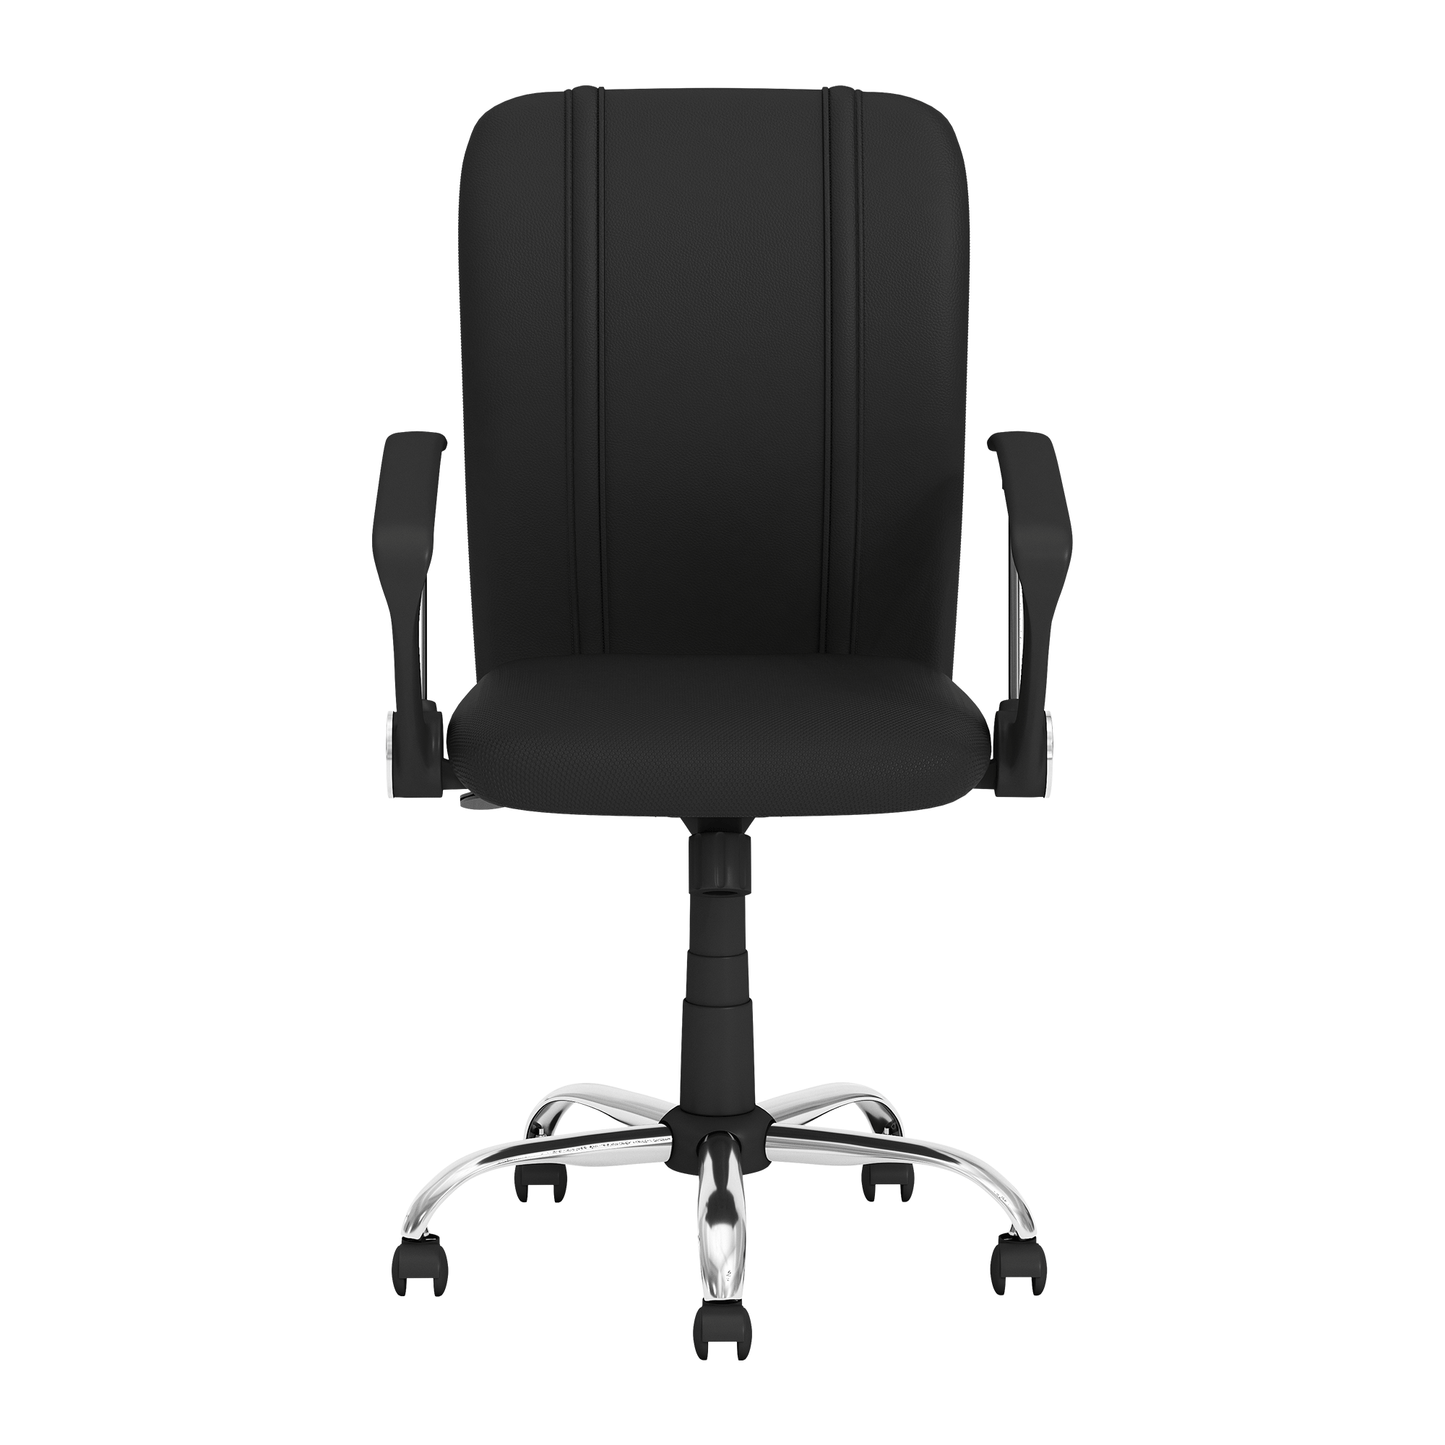 Curve Task Chair with Los Angeles Lakers 2020 Champions Logo